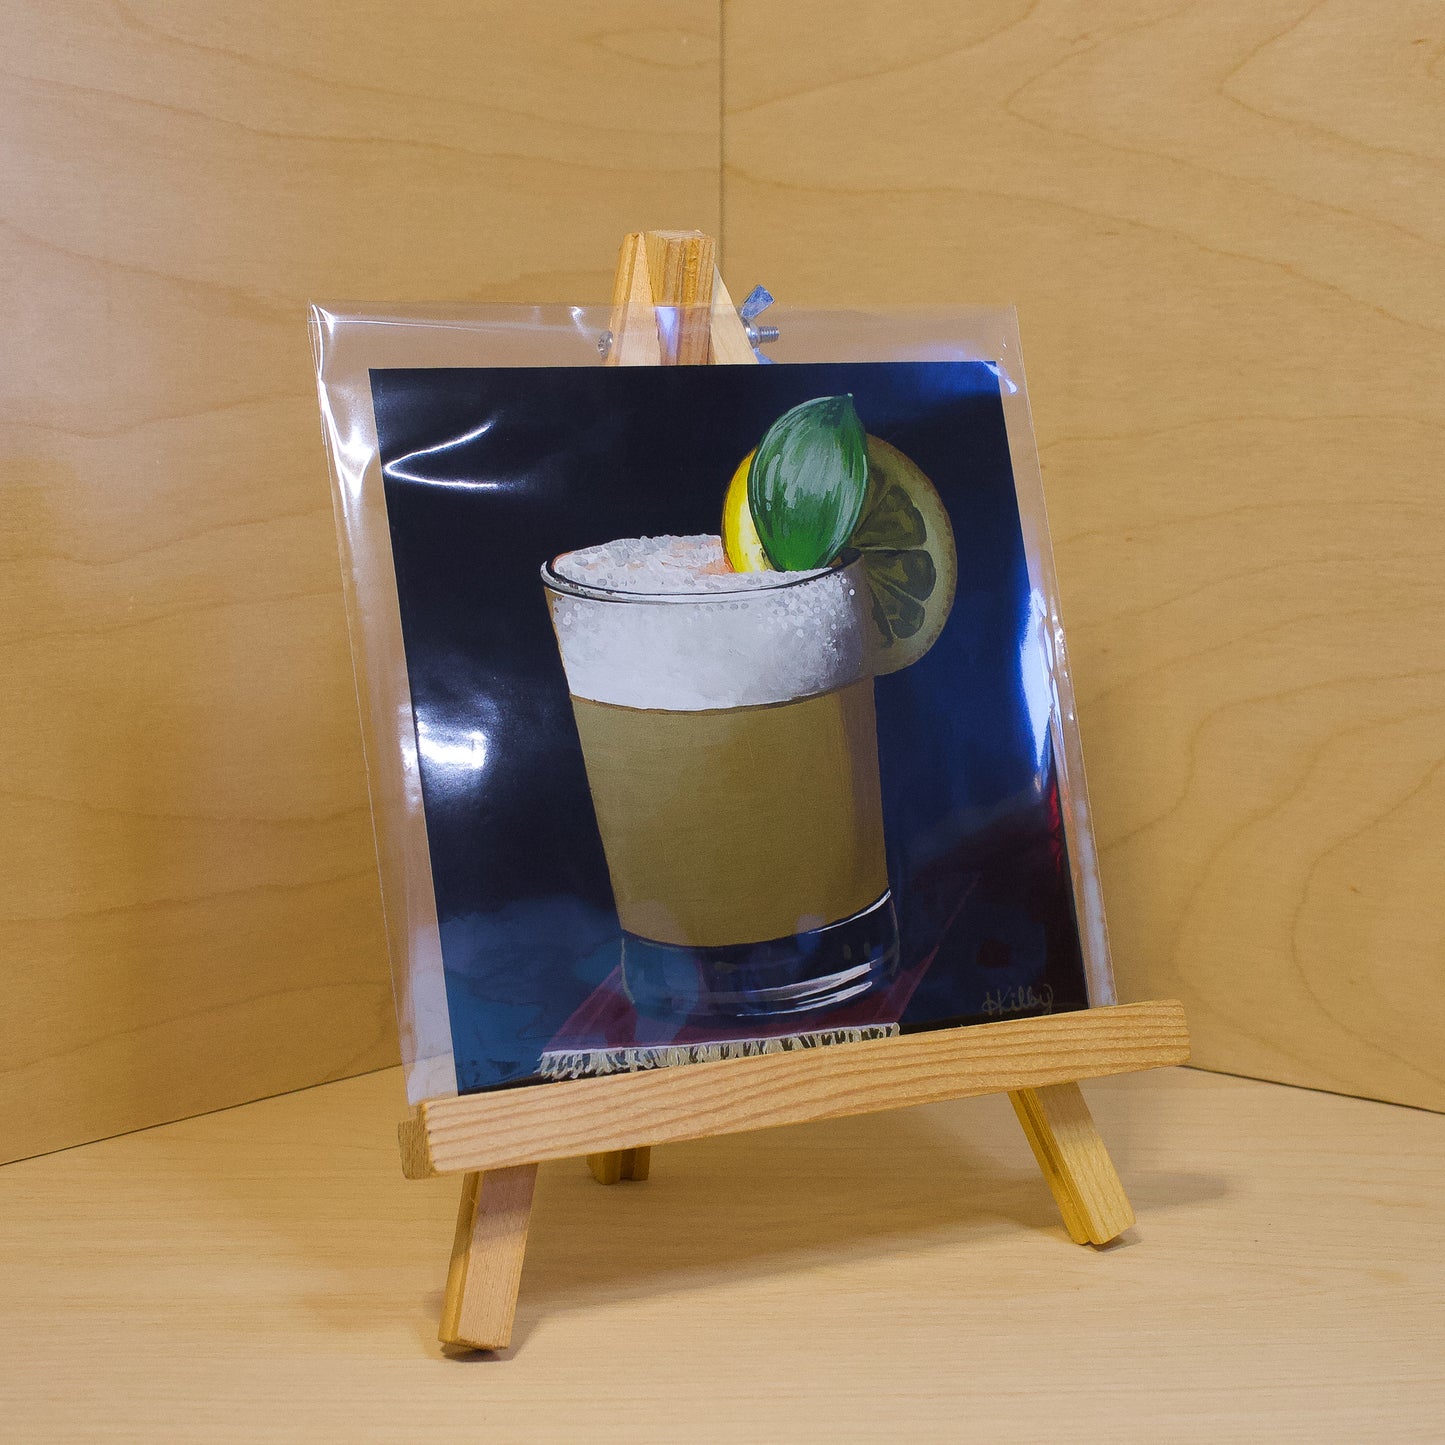 A 6x6" fine art print of the original acrylic painting "Whiskey Sour" by Hannah Kilby from Hannah Michelle Studios. Displayed in a protective plastic sleeve on a small, wooden easel.